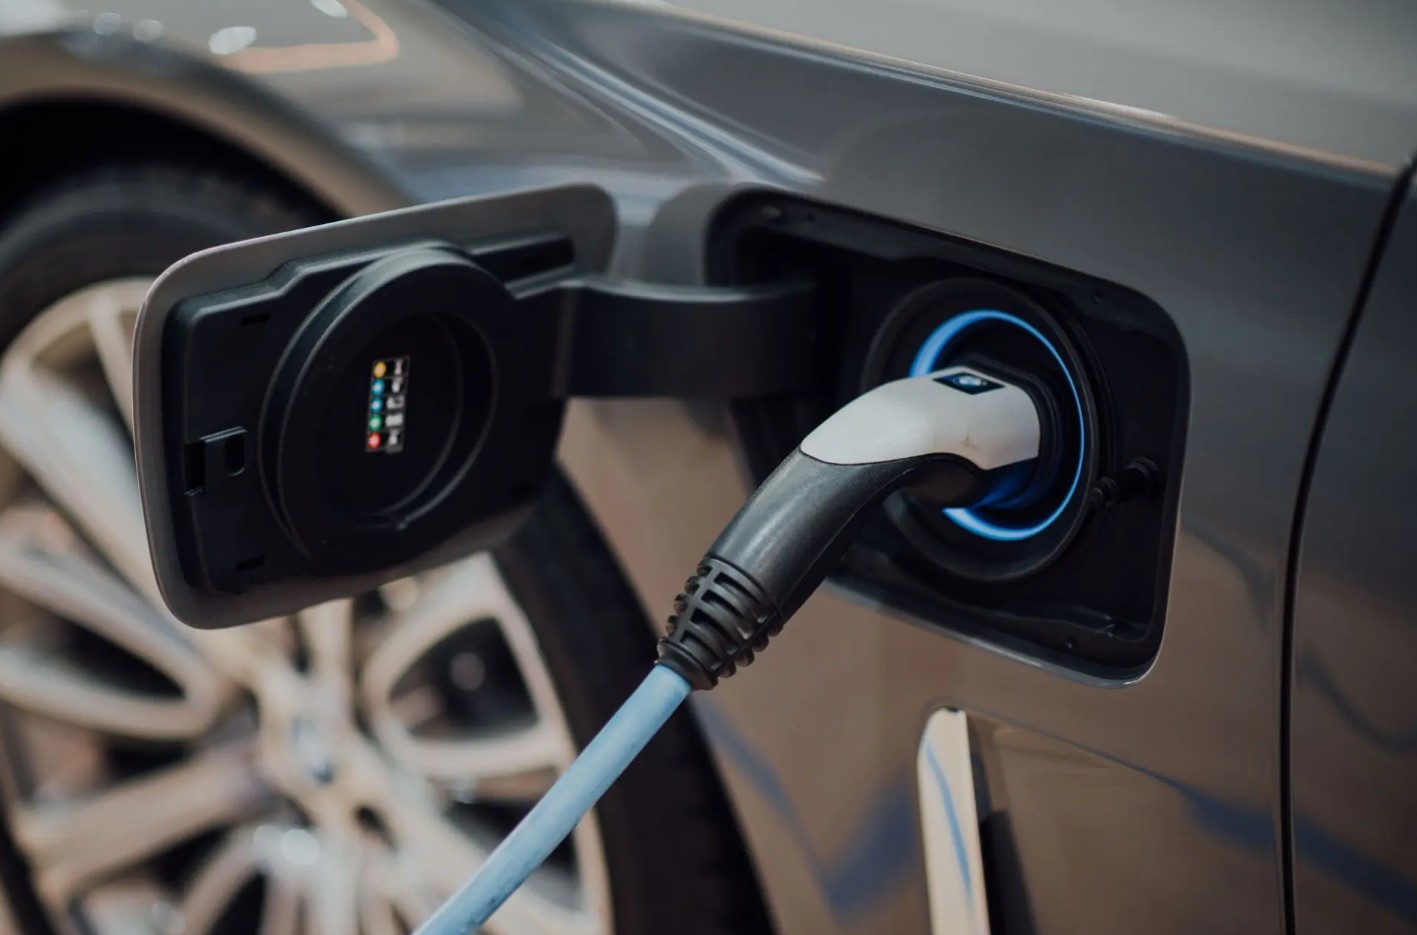 By implementing dynamic pricing, charging station operators can optimize the utilization of their charging infrastructure, encourage off-peak charging, and increase revenue.